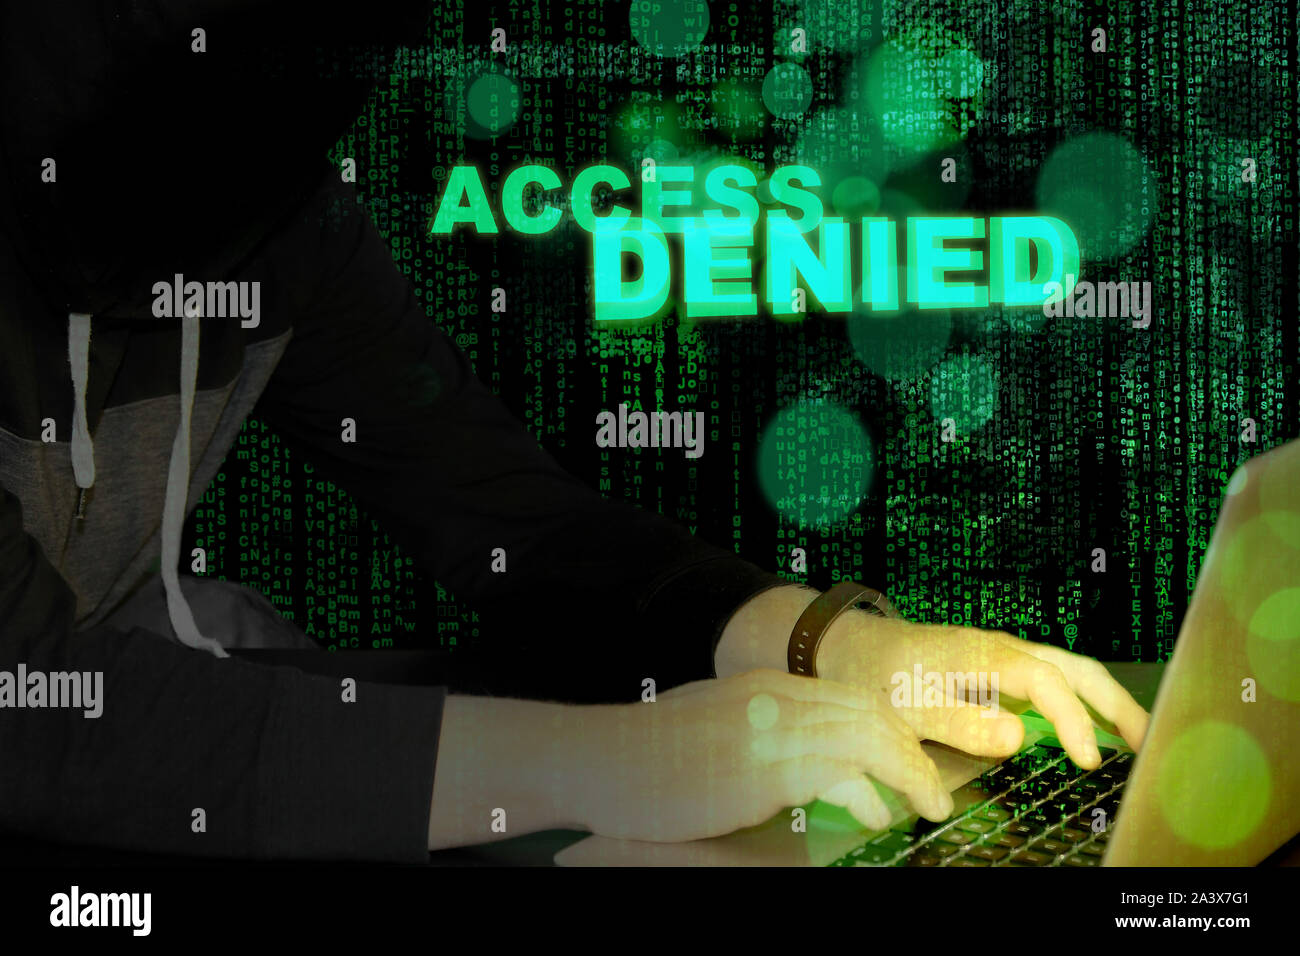 Access Denied High Resolution Stock Photography and Images - Alamy